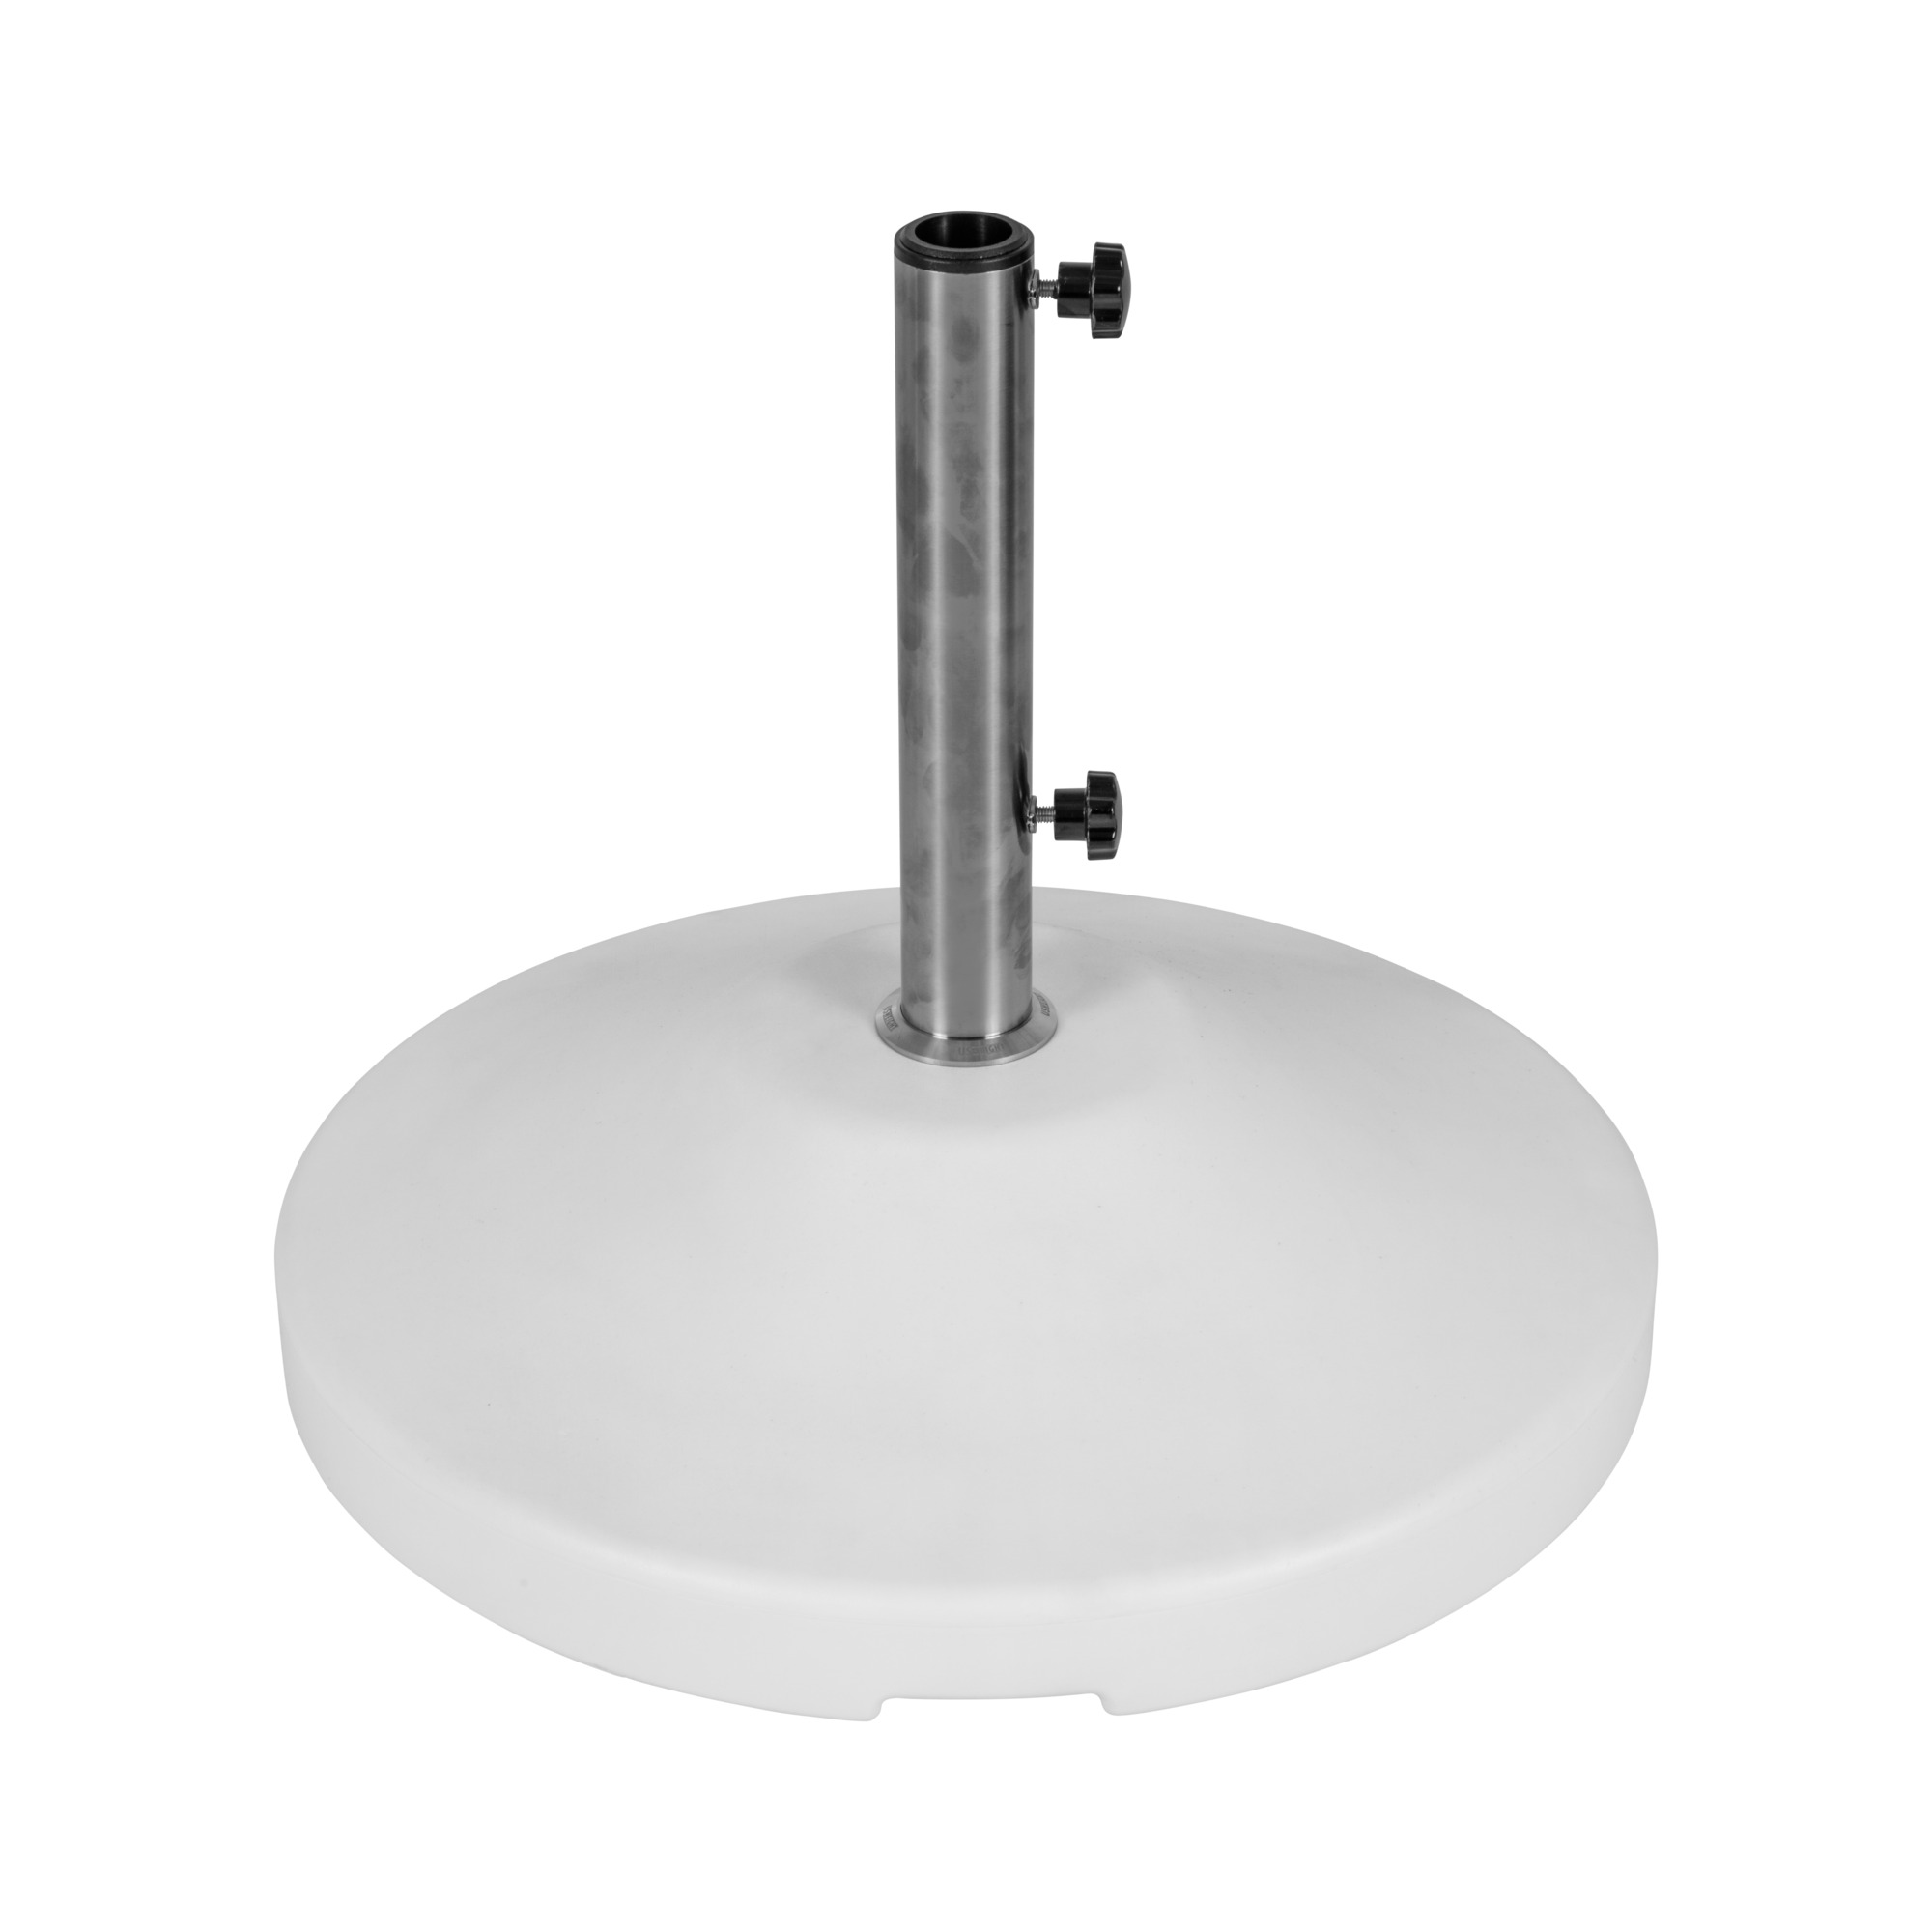 US Weight, 120 lb. Free Standing Umbrella Base (White), Included (qty.) 1 Model FUB120W